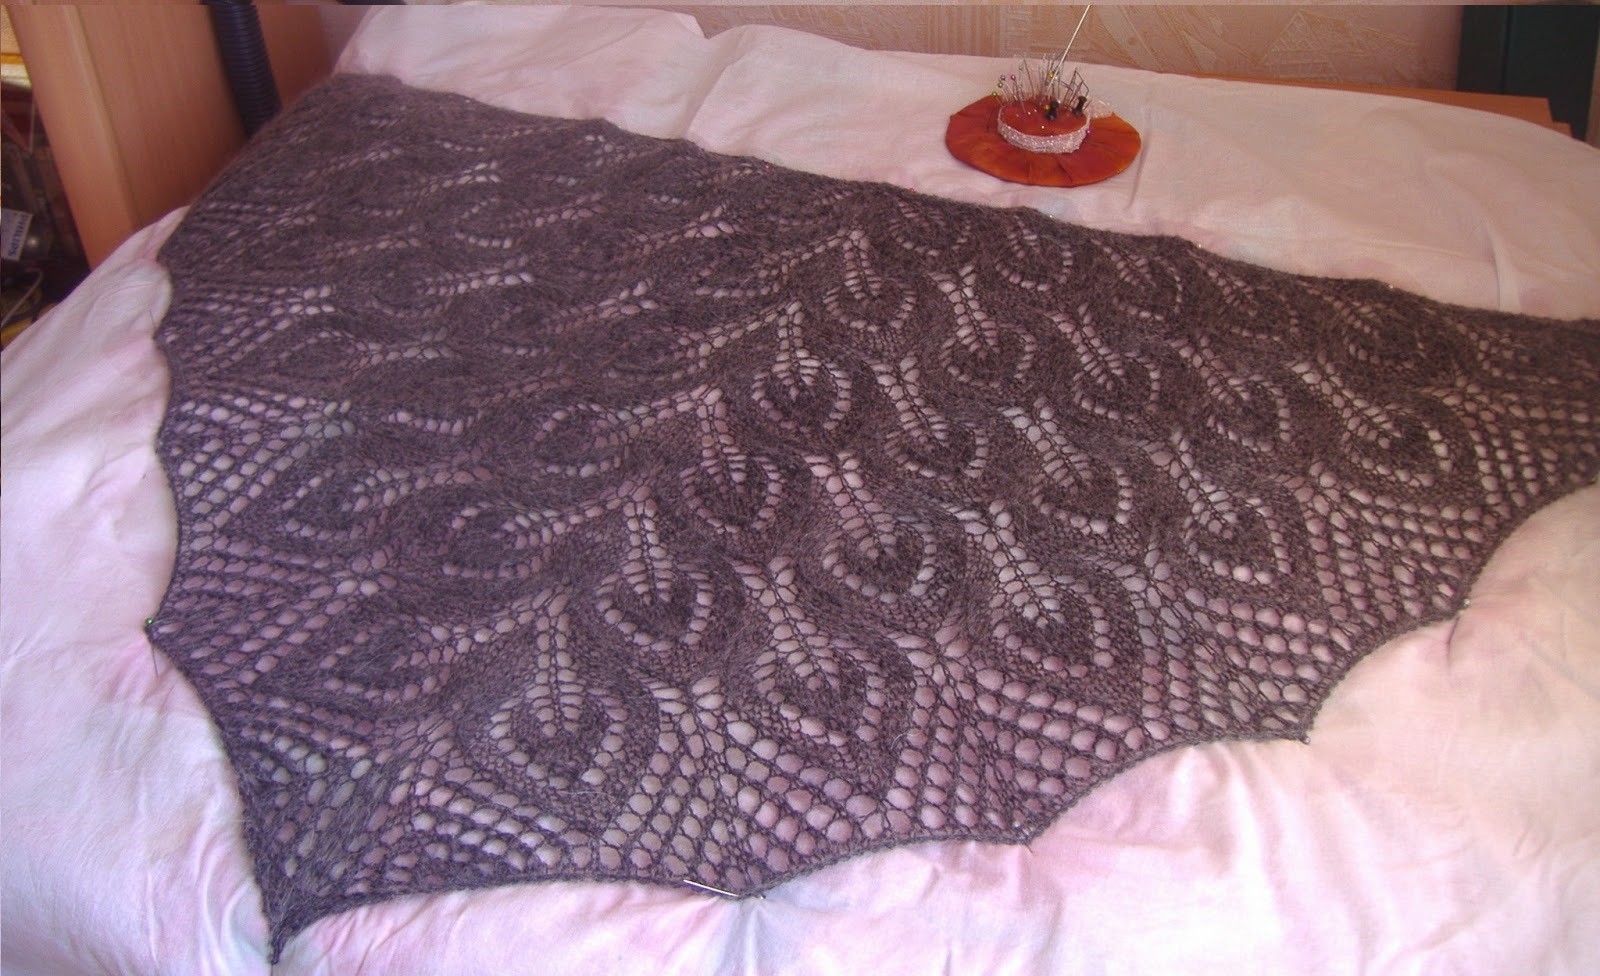 dry the shawl on a flat surface